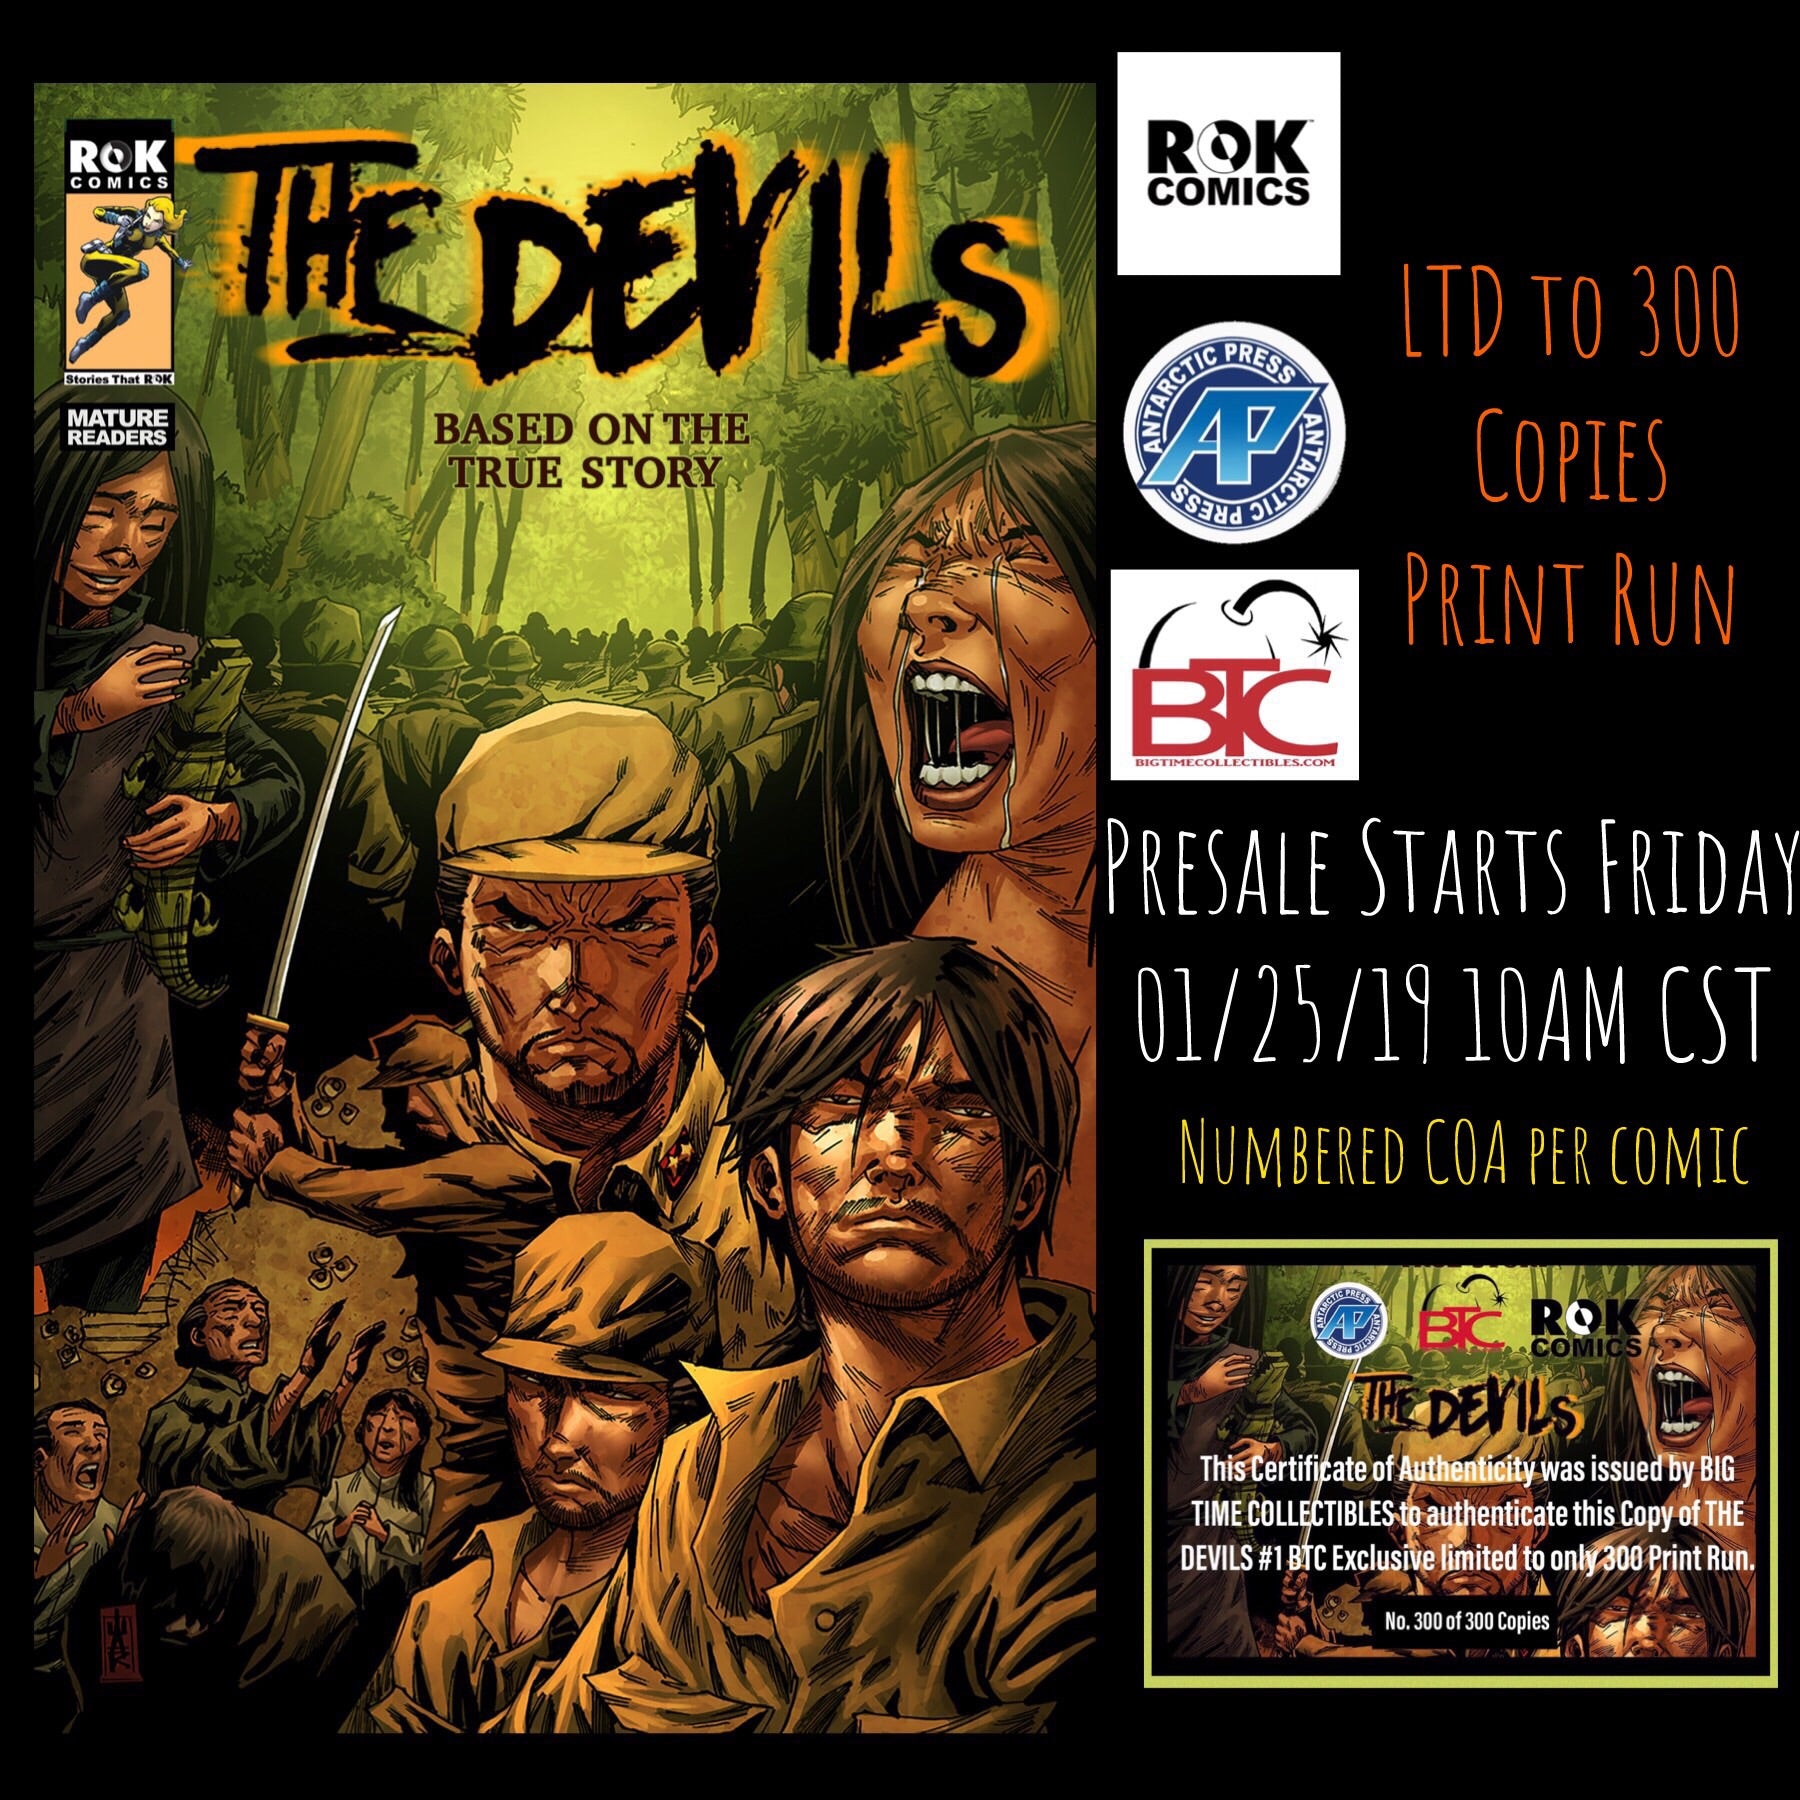 THE DEVILS #1 BTC EXCLUSIVE LIMITED TO 300 COPIES PRINT RUN 02/13/19